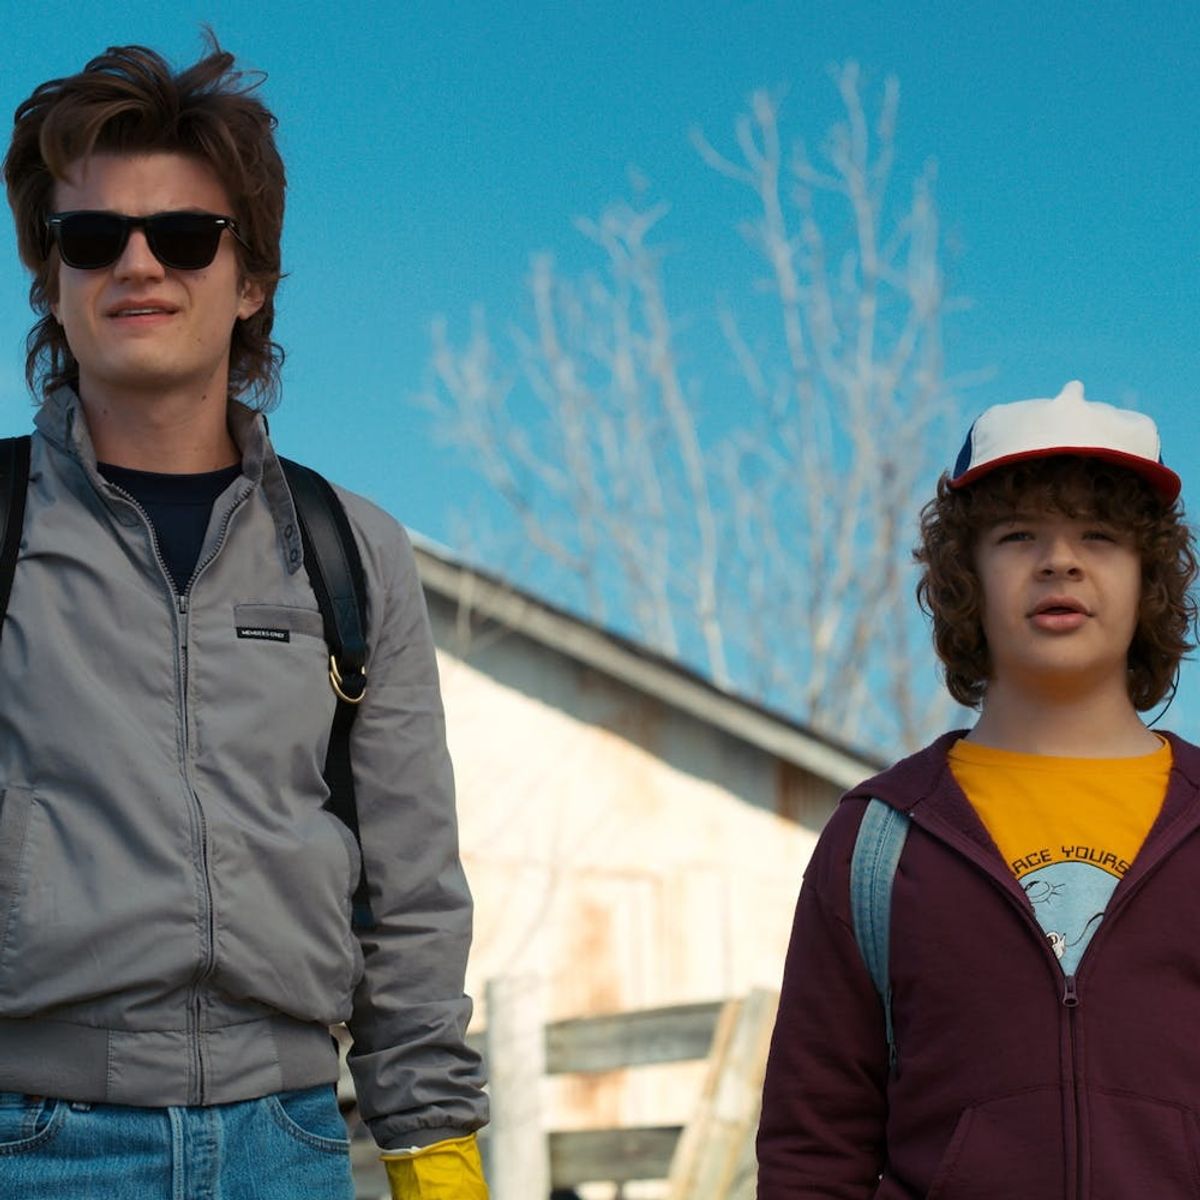 This ‘Stranger Things’ Season 3 Mall Teaser Is Not What We Were Expecting